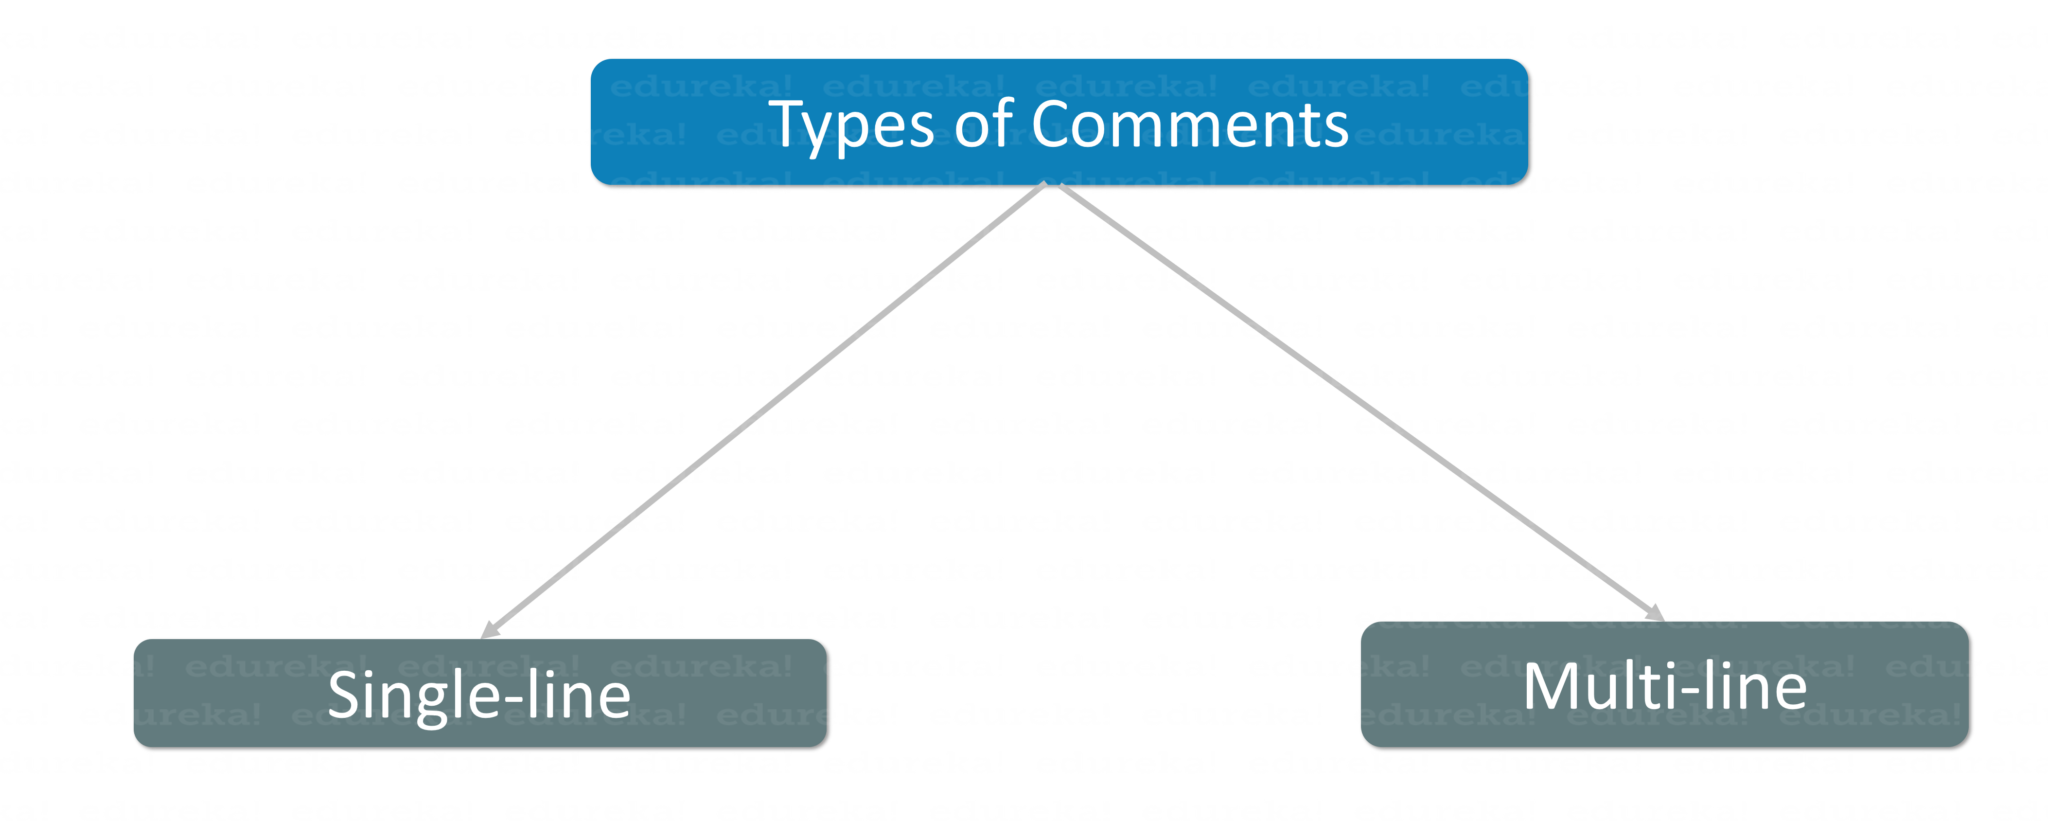 Types of comments in python